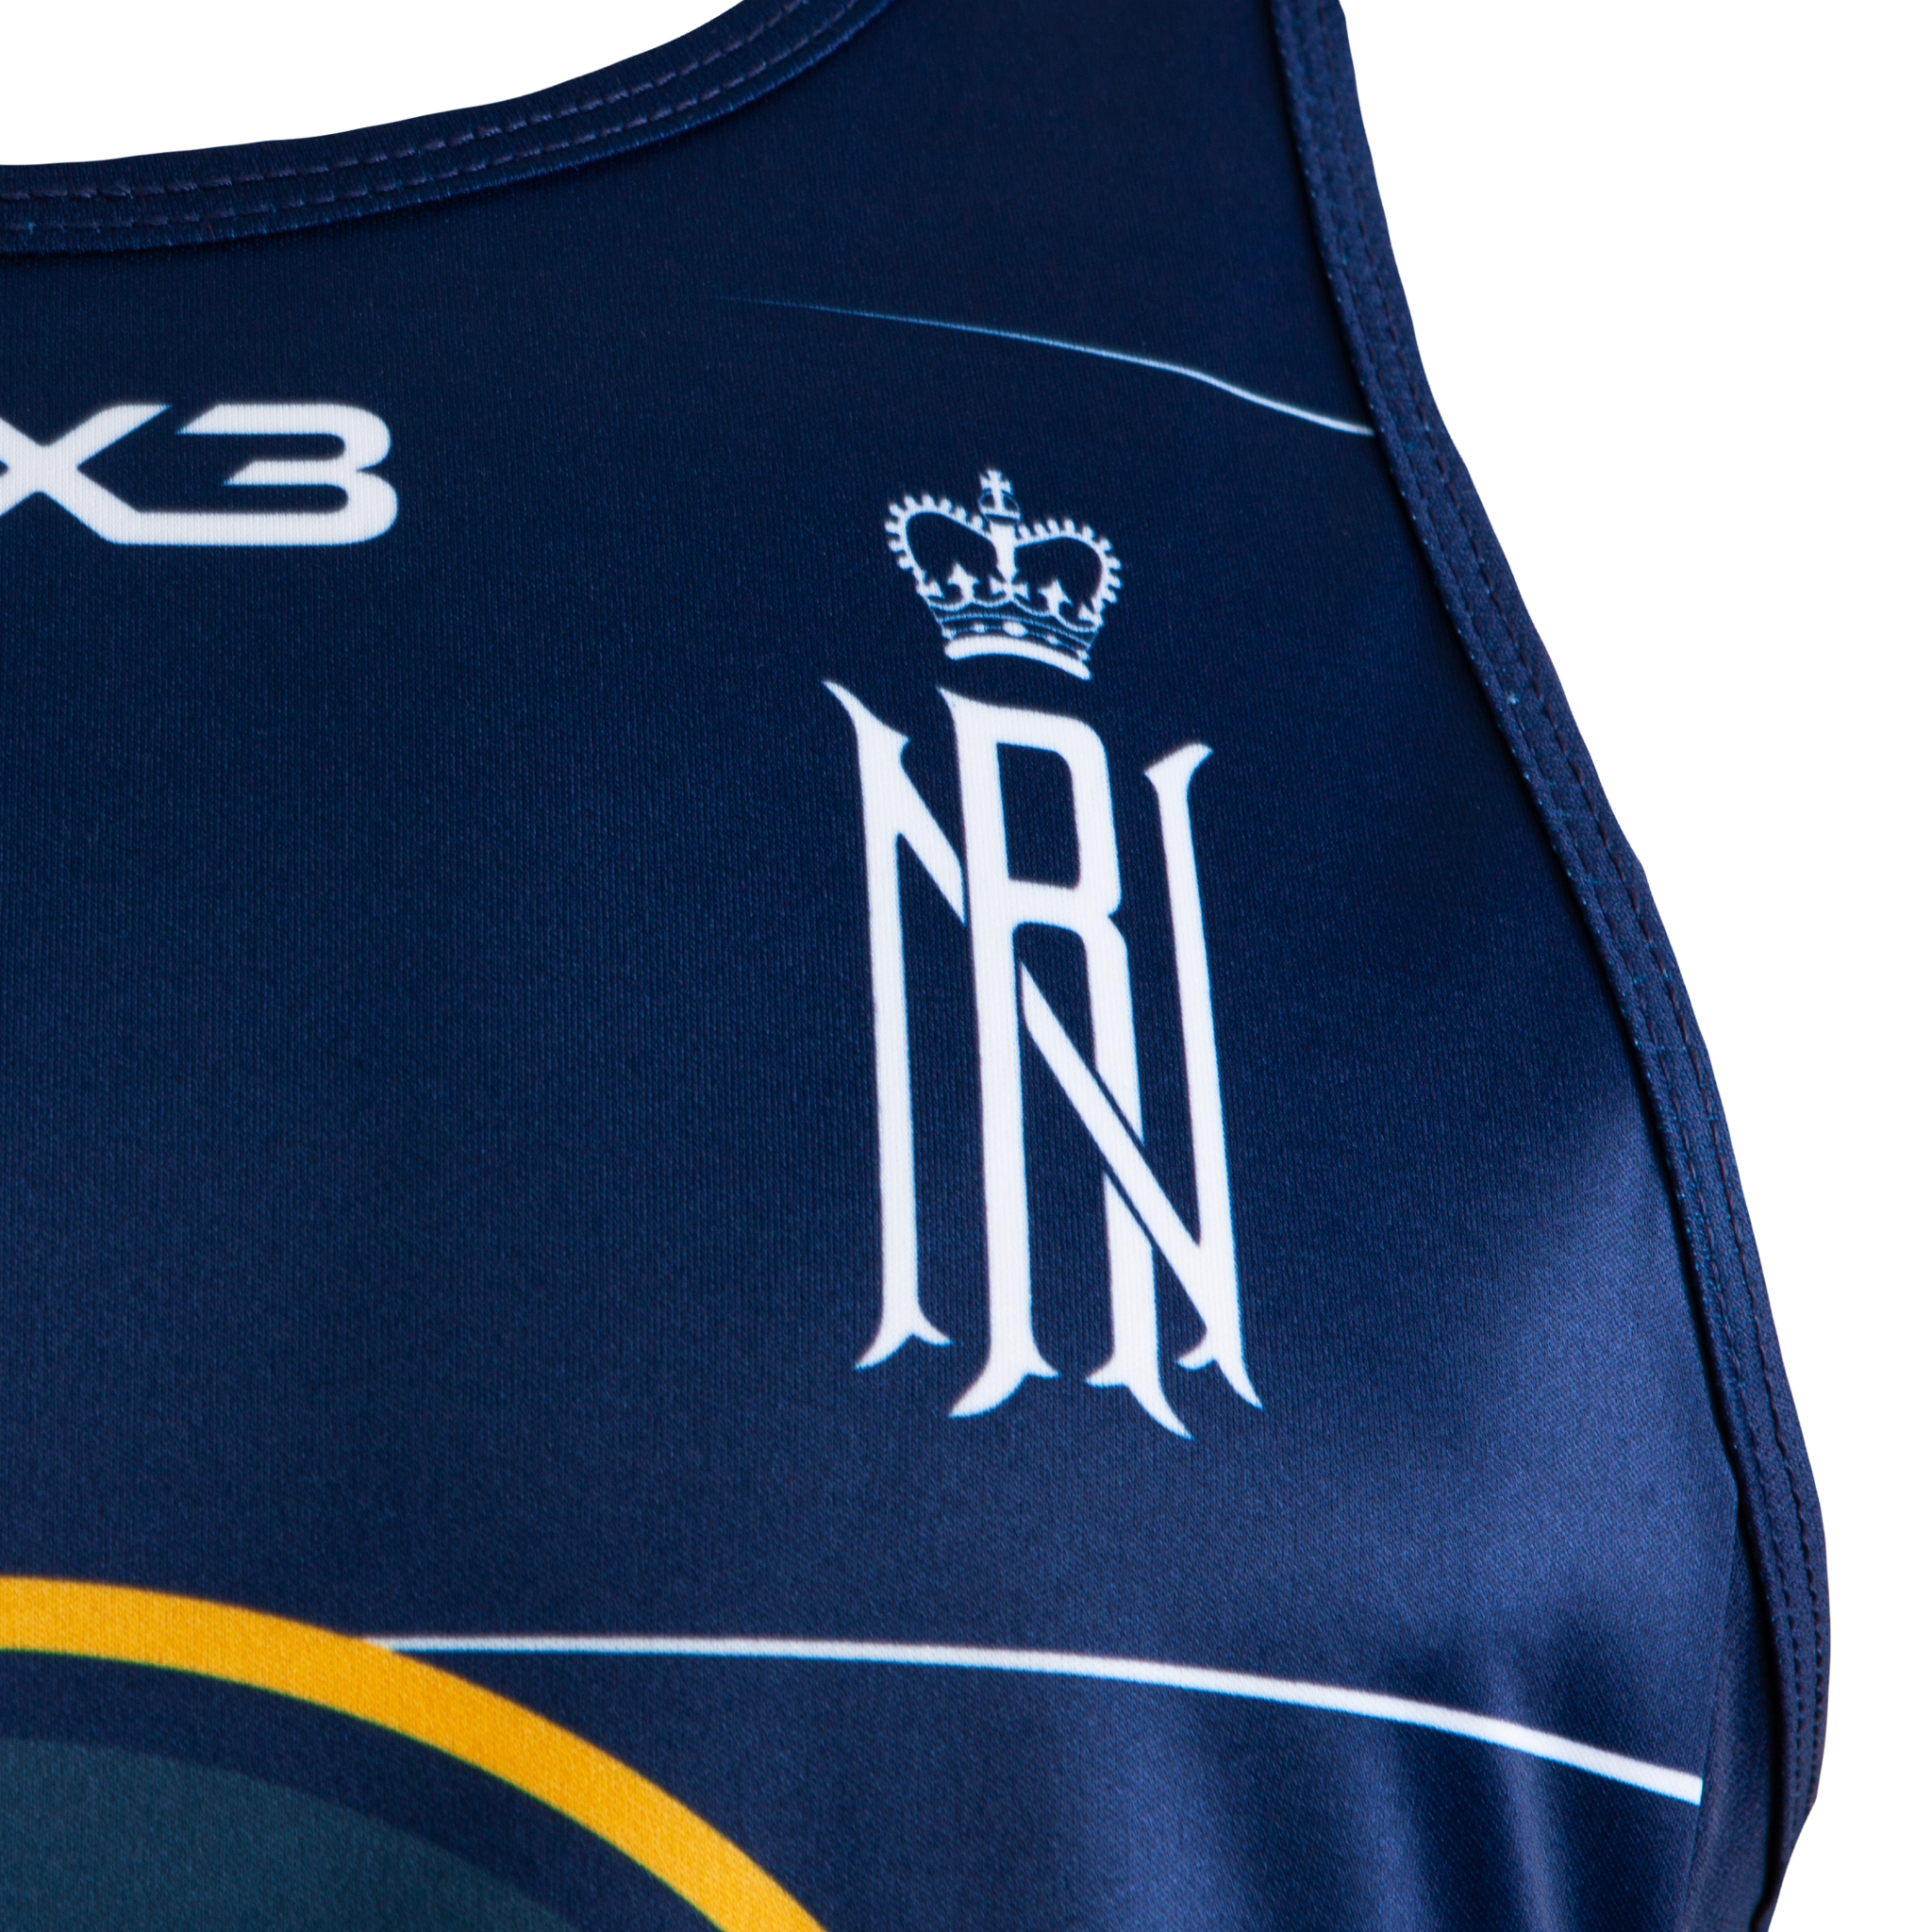 Royal Navy Rugby Training Vest